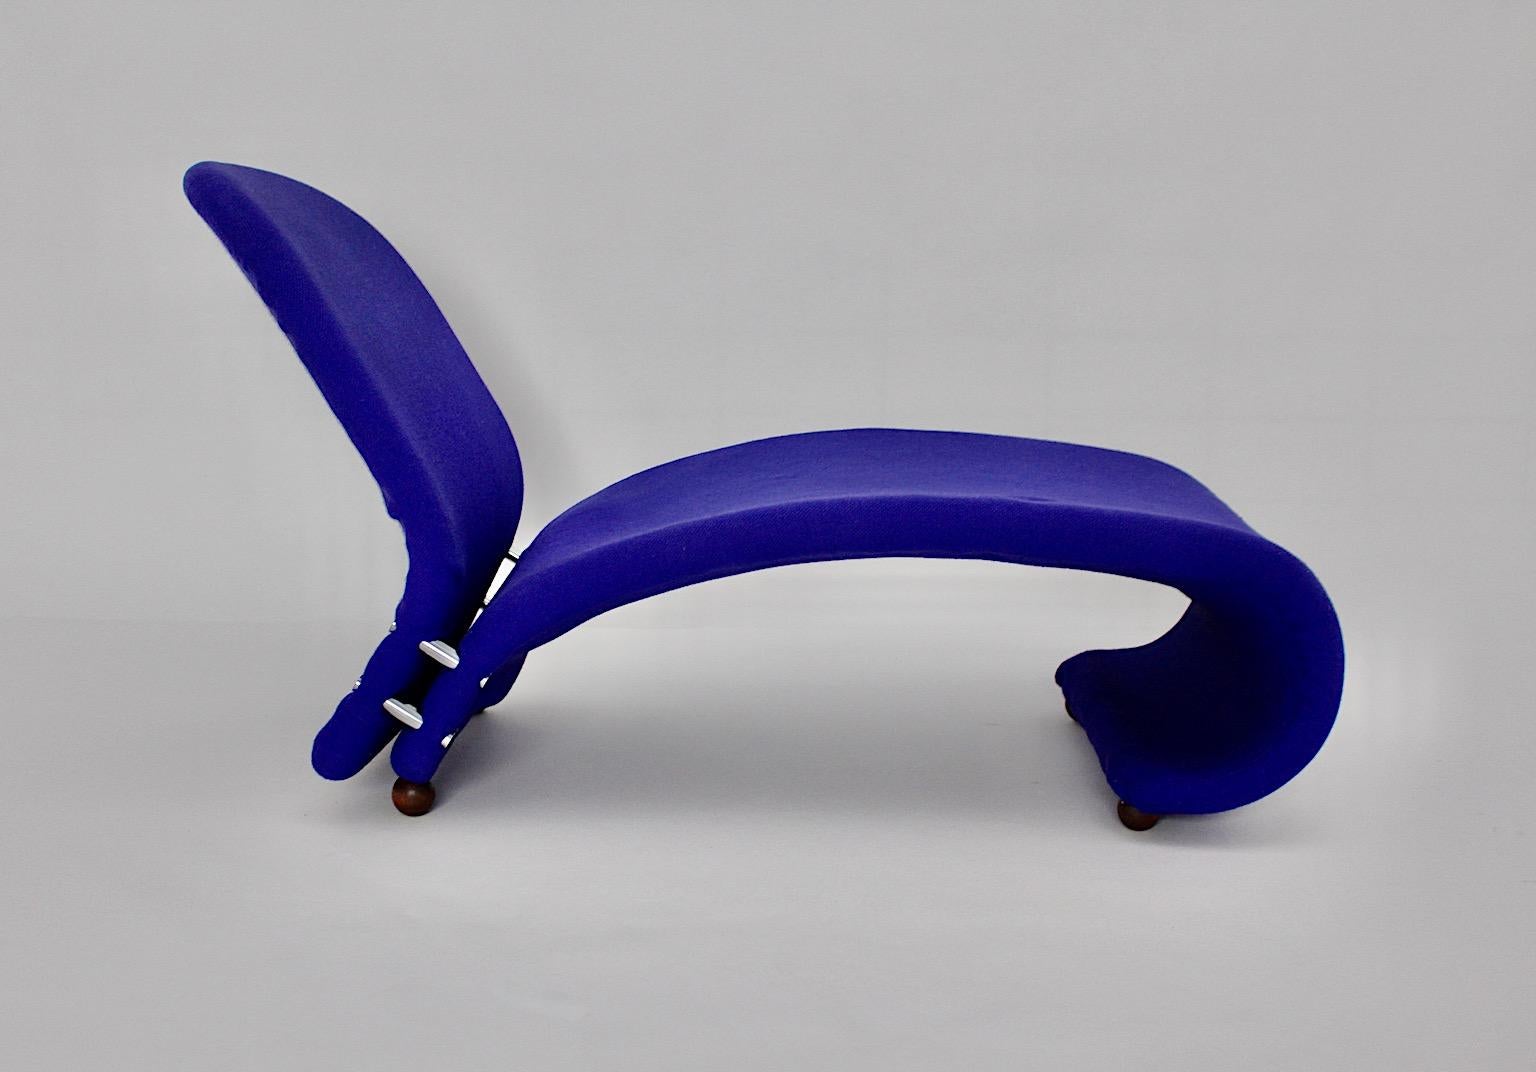 Space Age Vintage Organic Anthropomorph Blue Chaise Longue Verner Panton 1962/63 In Good Condition For Sale In Vienna, AT